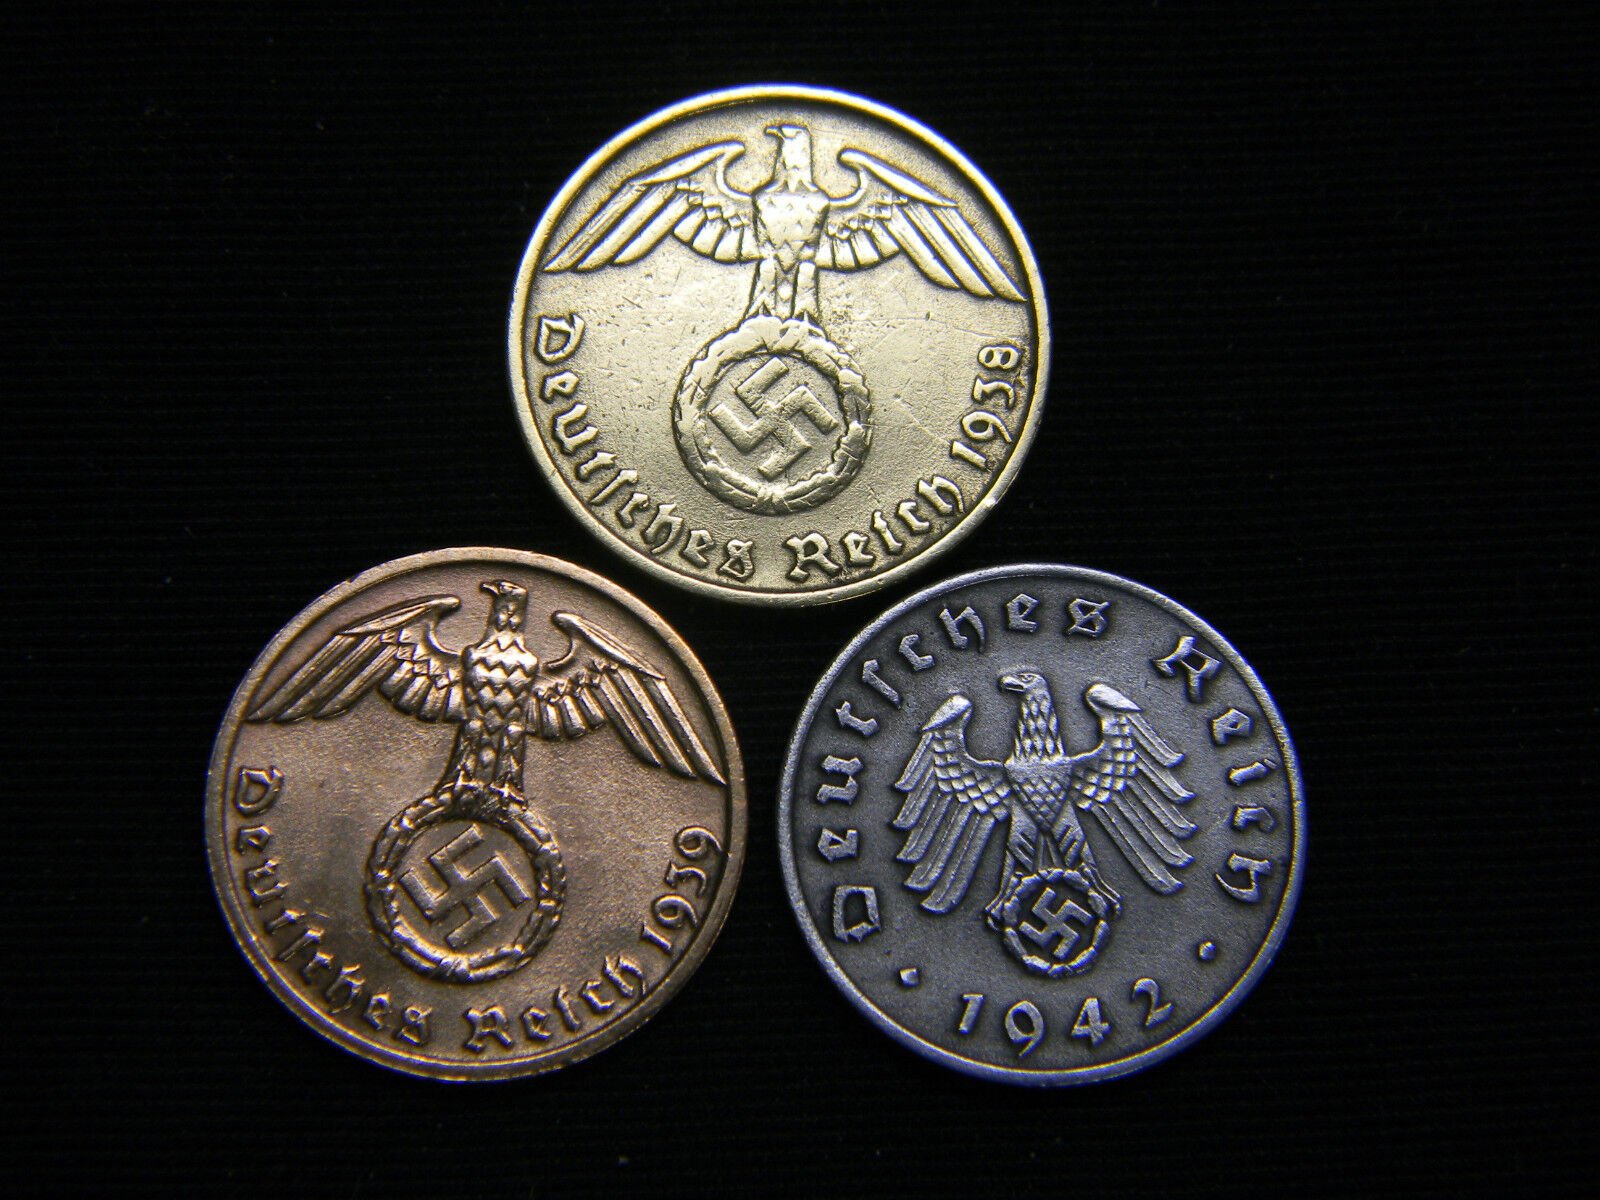 Rare WW2 German Coins Historical WW2 Authentic Artifacts